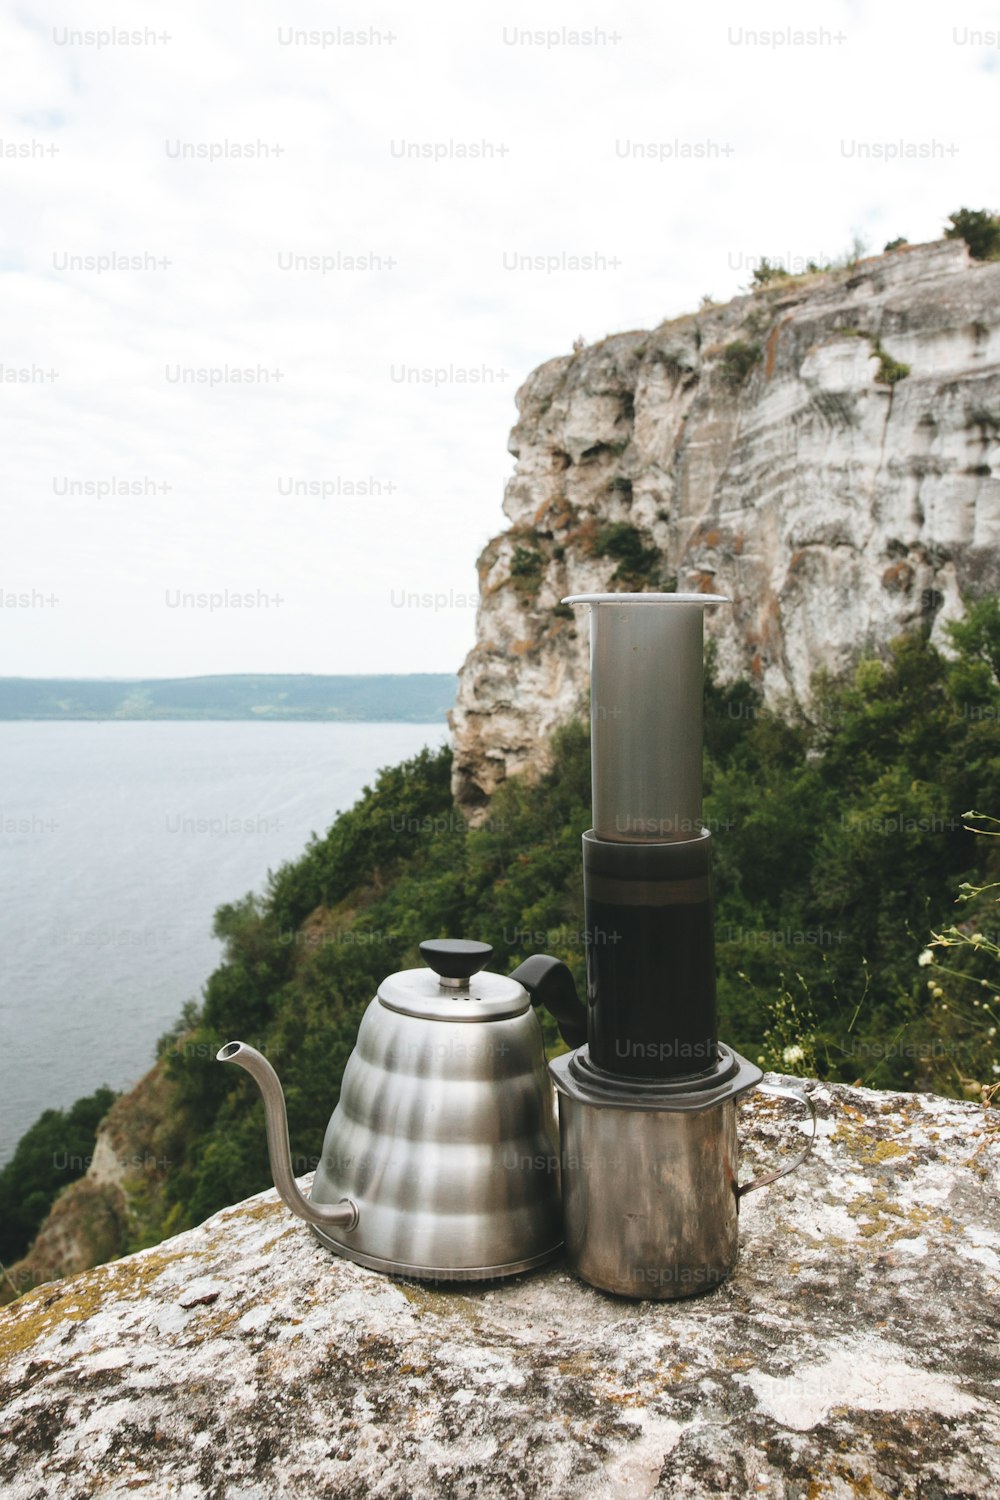 Steel kettle and aeropress on metal mug on cliff at lake, brewing alternative coffee at camping. Making hot drink at picnic outdoors. Trekking and hiking in mountains